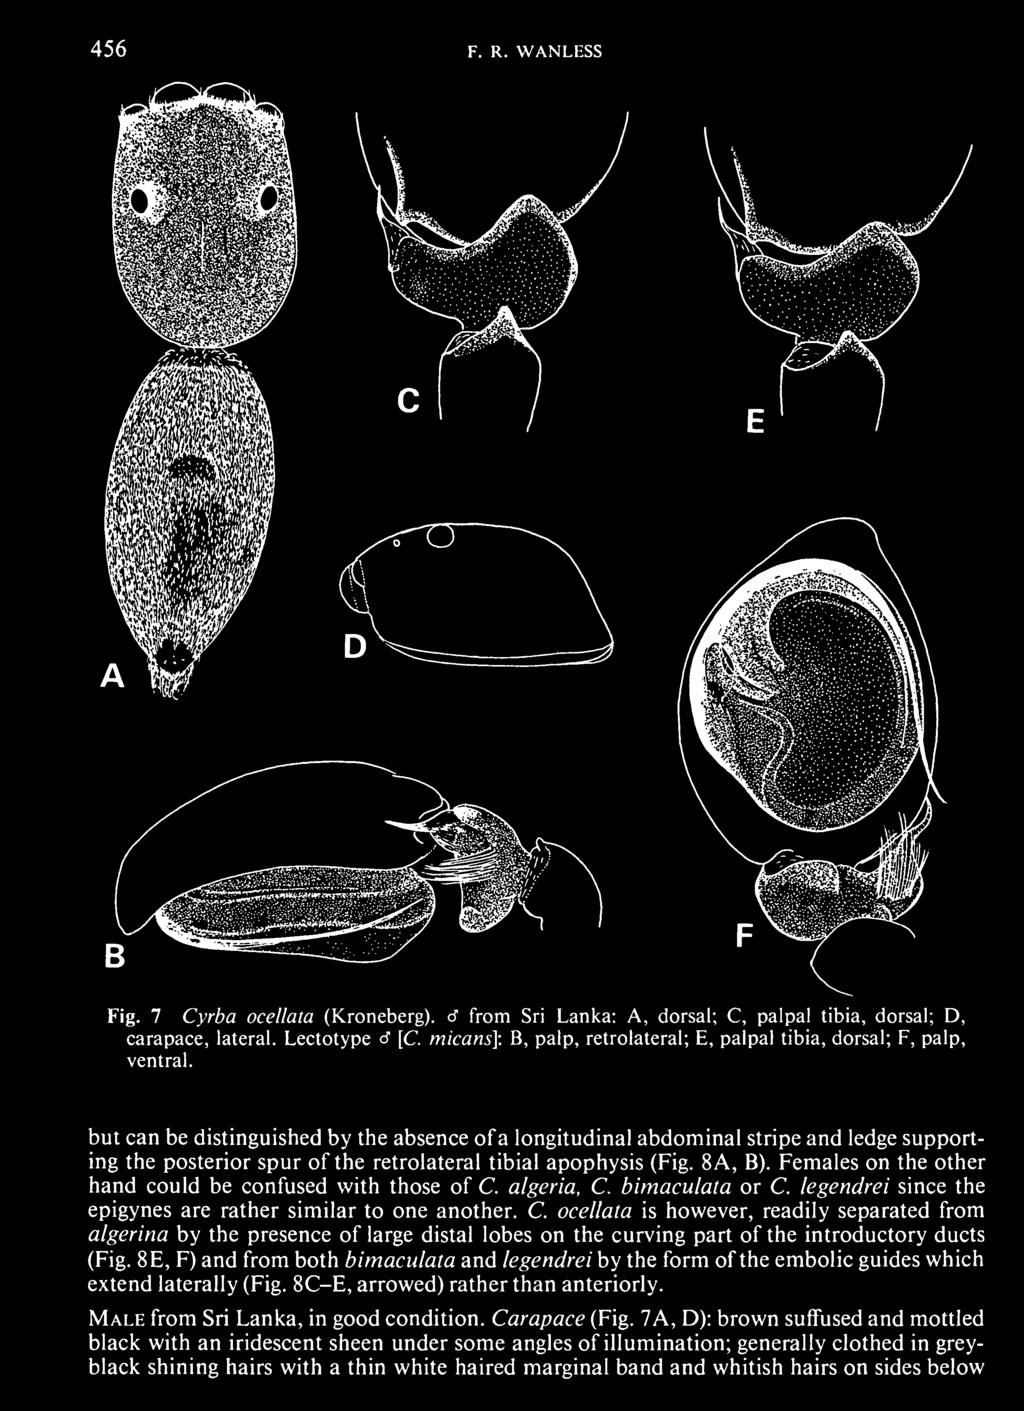 algeria, C. bimaculata or C. legendrei since the epigynes are rather similar to one another. C. ocellata is however, readily separated from algerina by the presence of large distal lobes on the curving part of the introductory ducts (Fig.